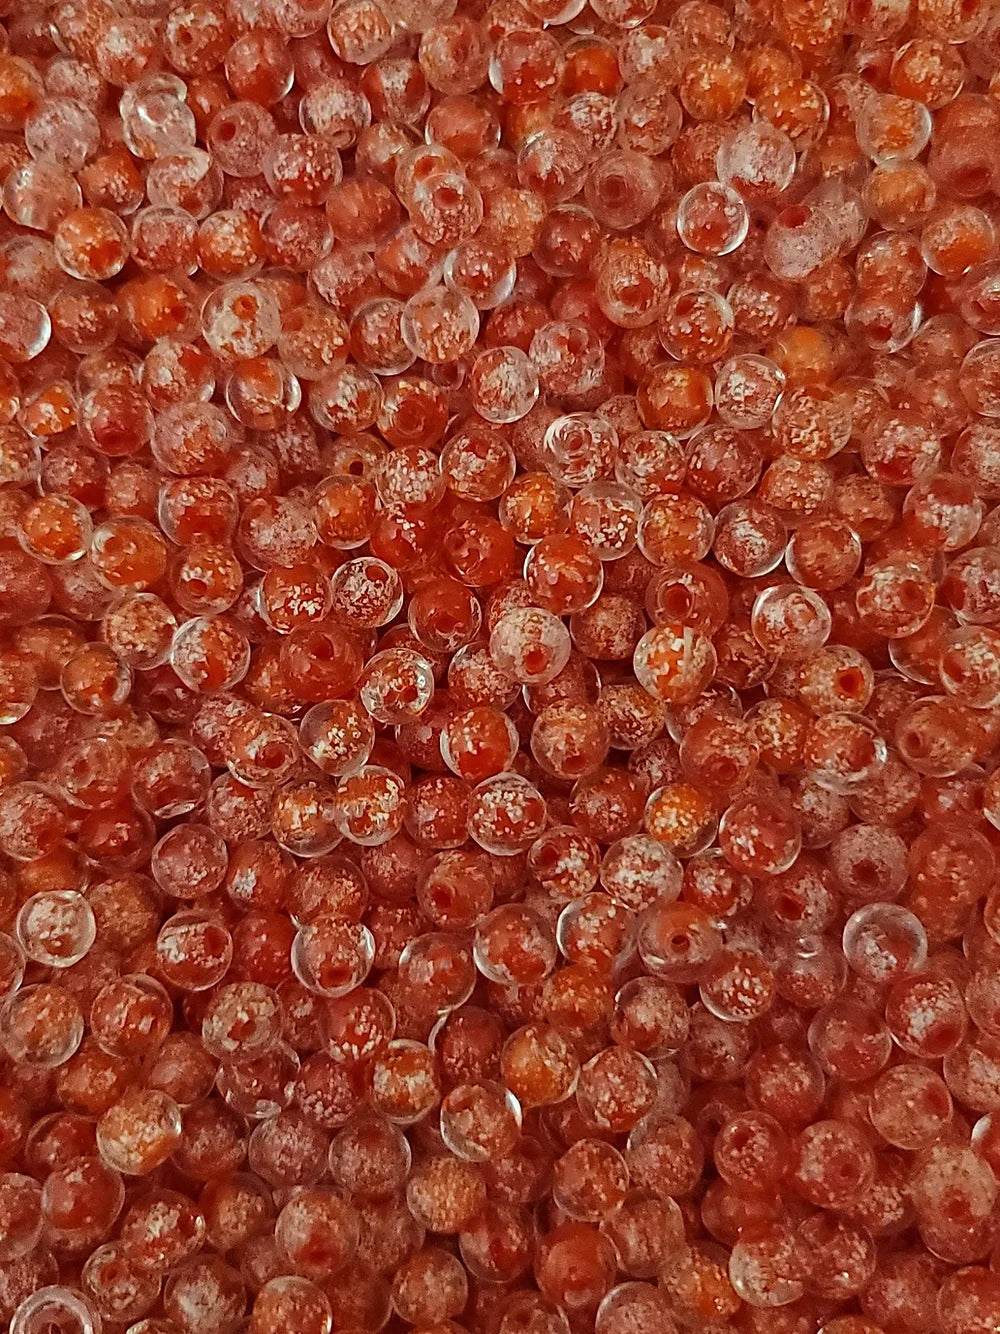 8mm Glass Beads 8mm / 270 Glow Roe Egg Red